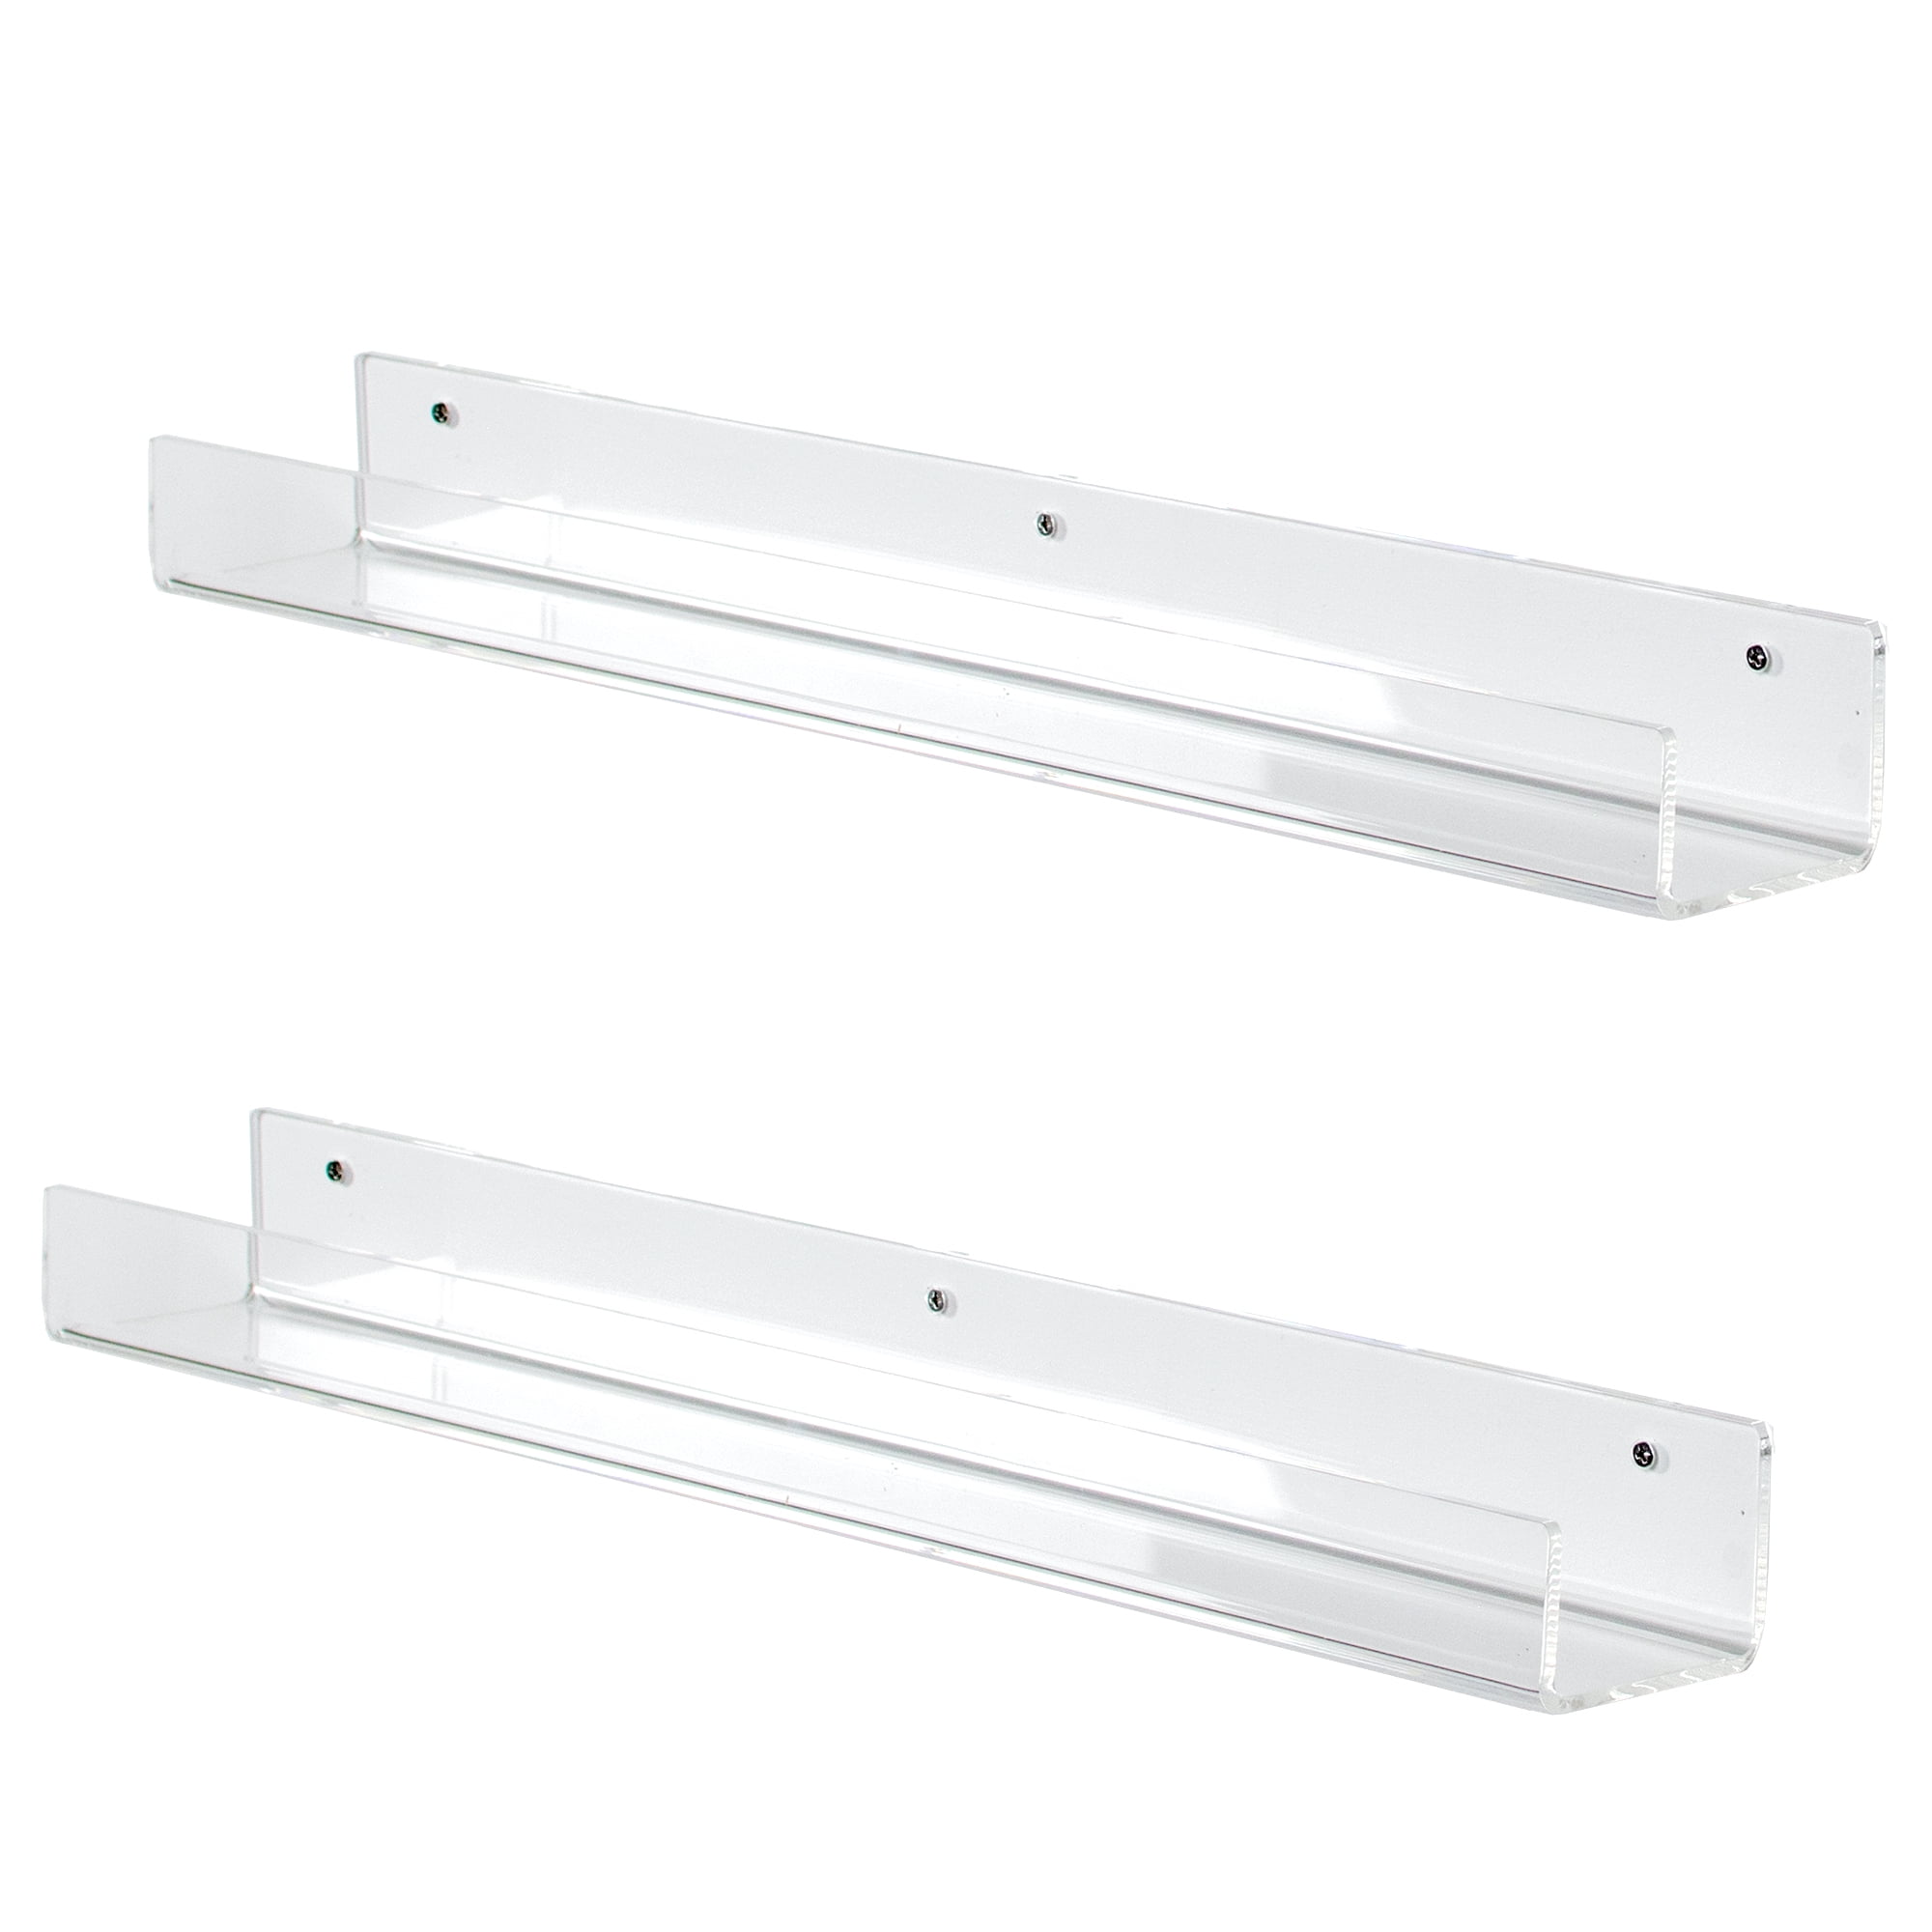 Clear Acrylic Bath 2 Pack, Medium Details about   AMT Acrylic Floating Wall Display Shelves 